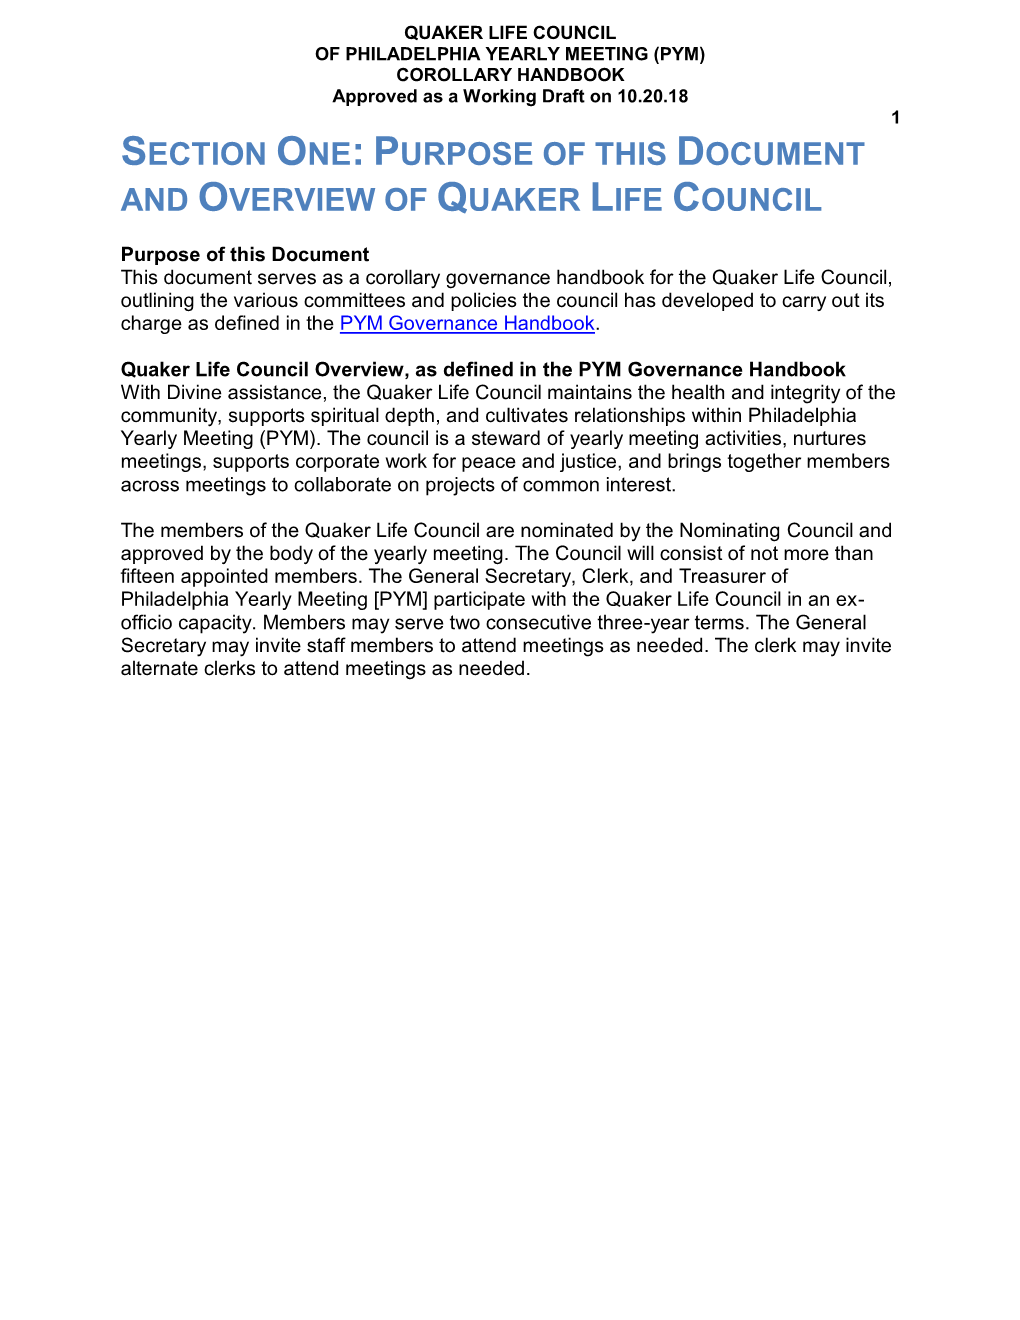 Section One: Purpose of This Document and Overview of Quaker Life Council